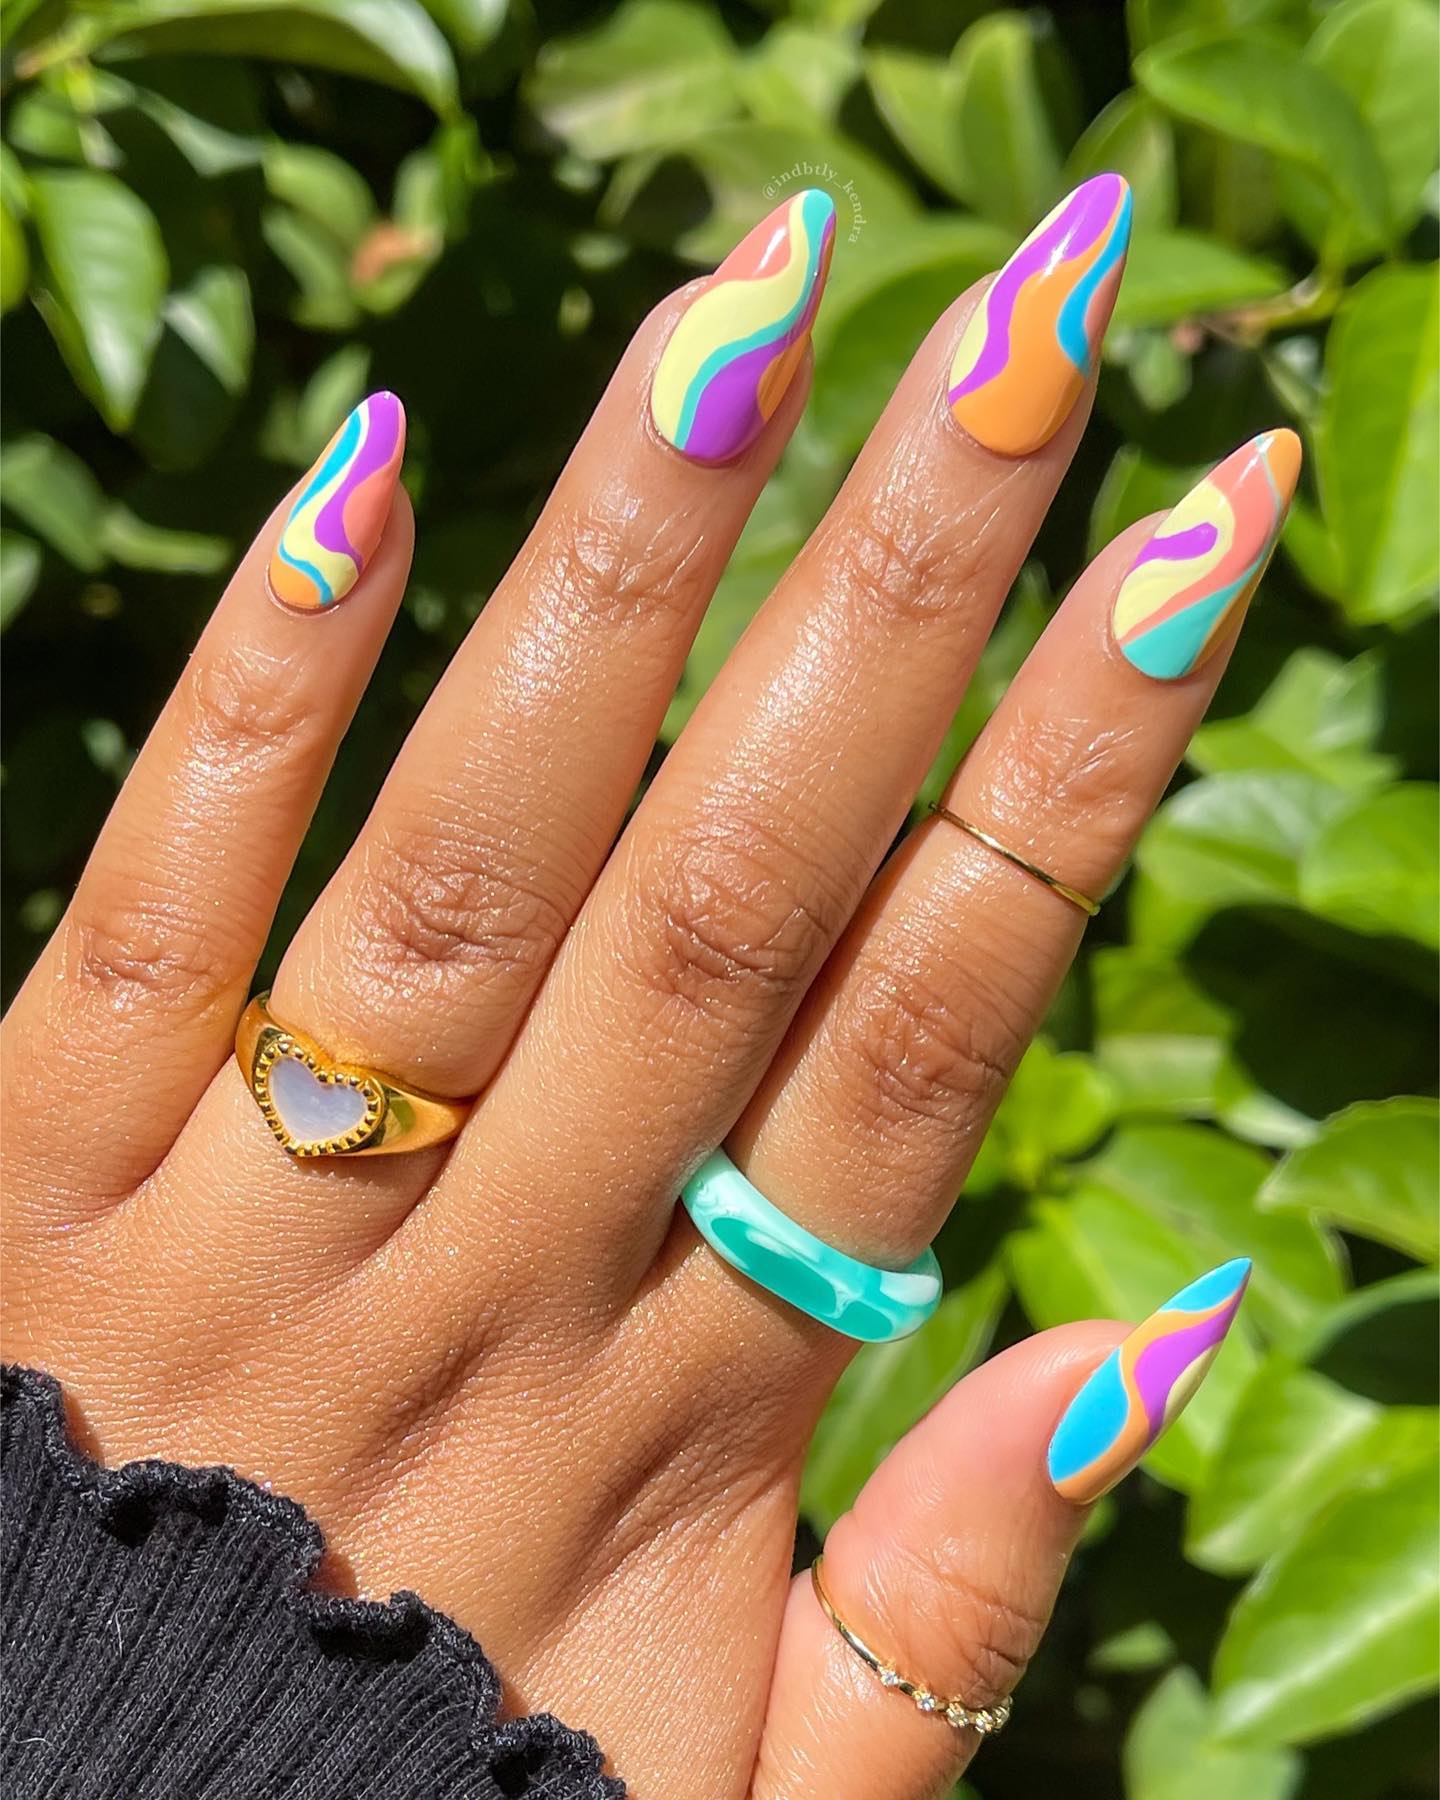 Can you see these amazing vibrant colors? For your summer nails, there is nothing better than having these giant swirls.